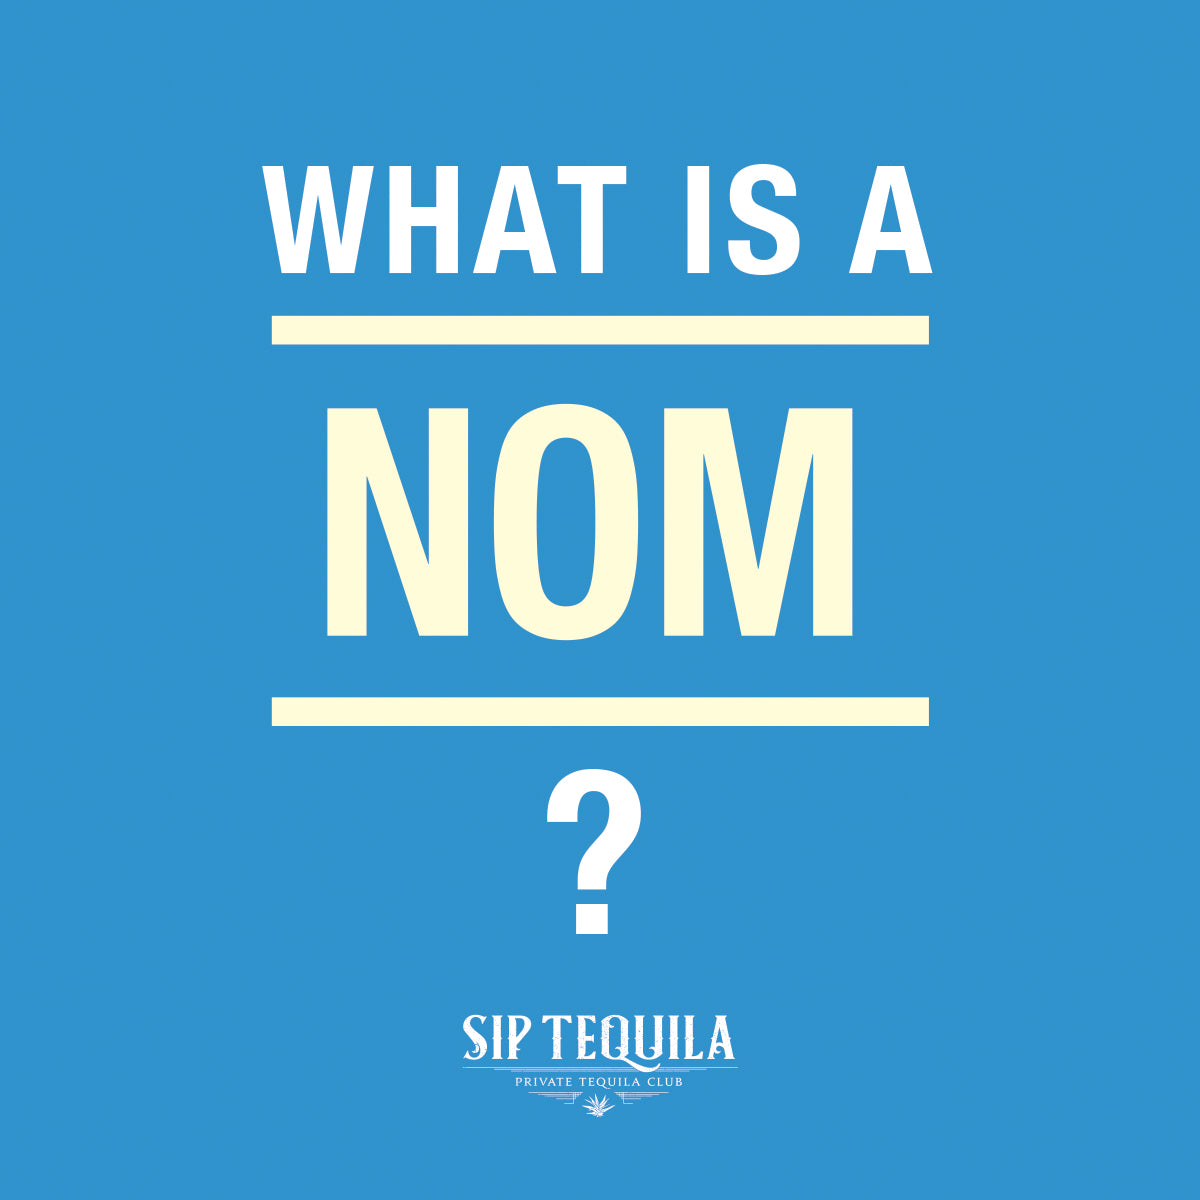 What is a NOM?